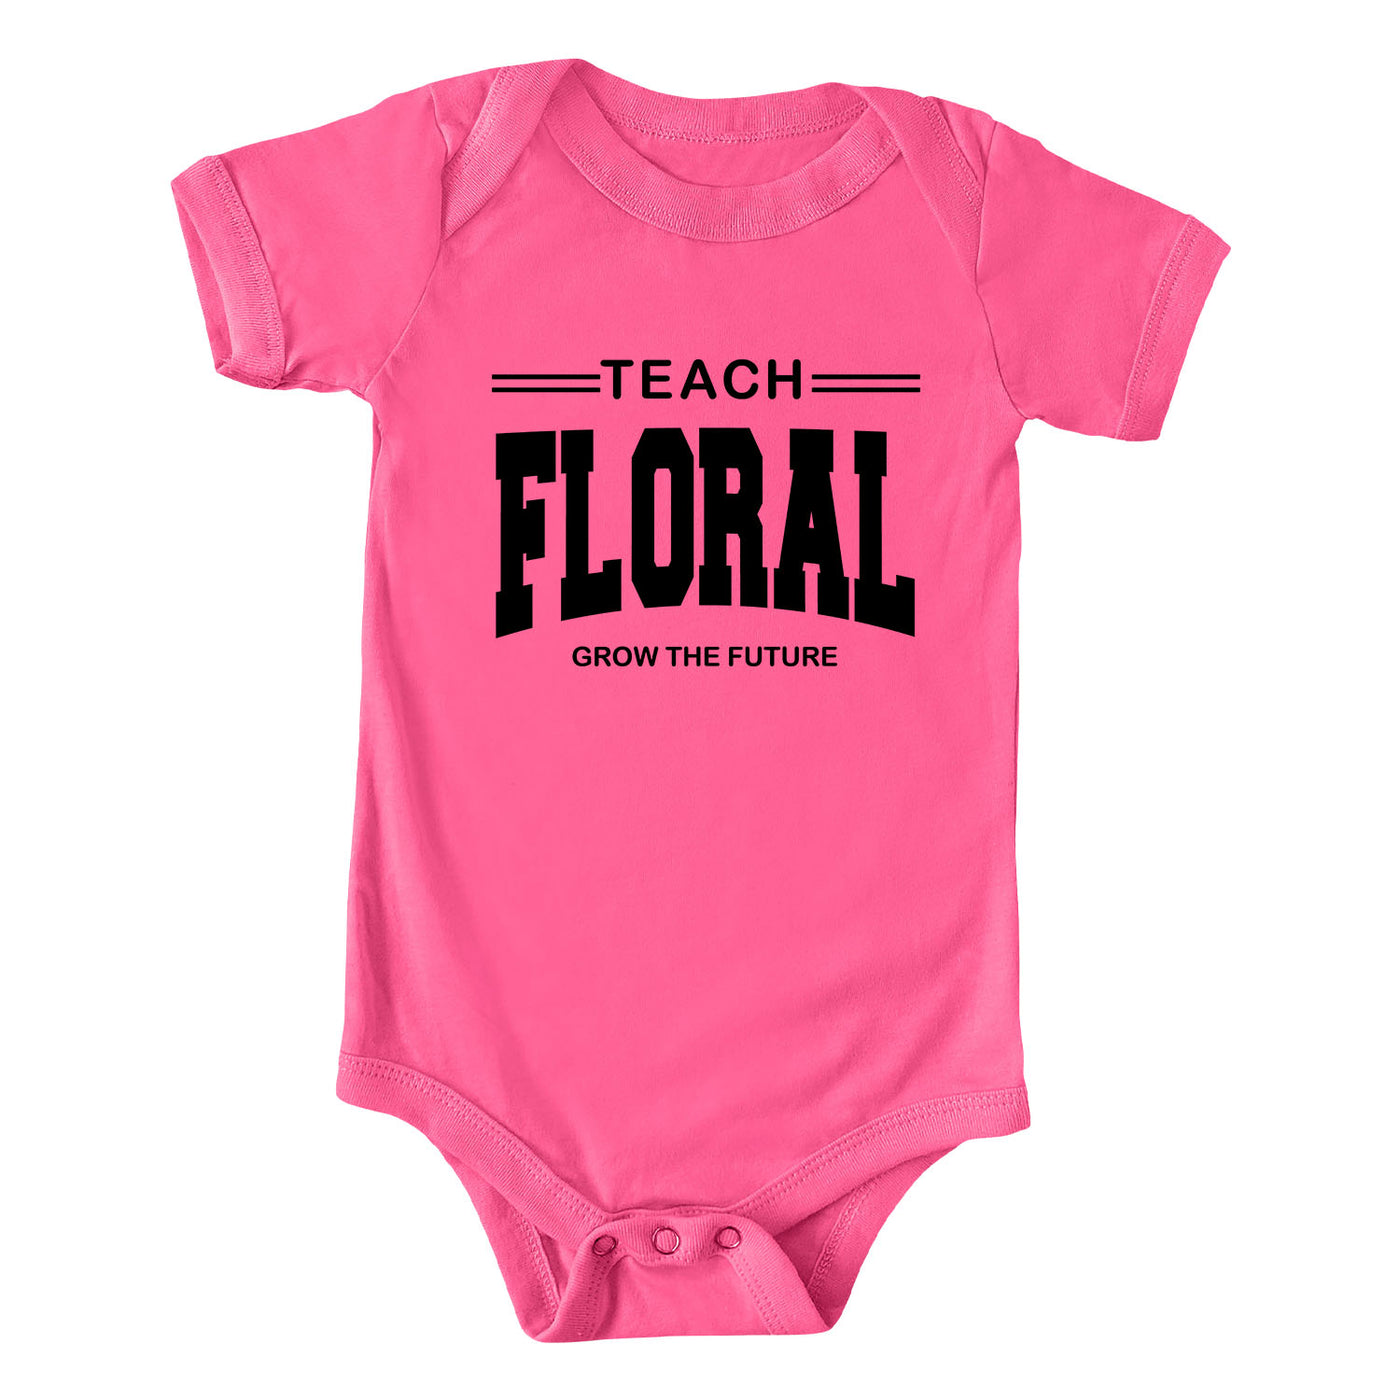 Teach Floral Grow The Future Black Ink One Piece/T-Shirt (Newborn - Youth XL) - Multiple Colors!